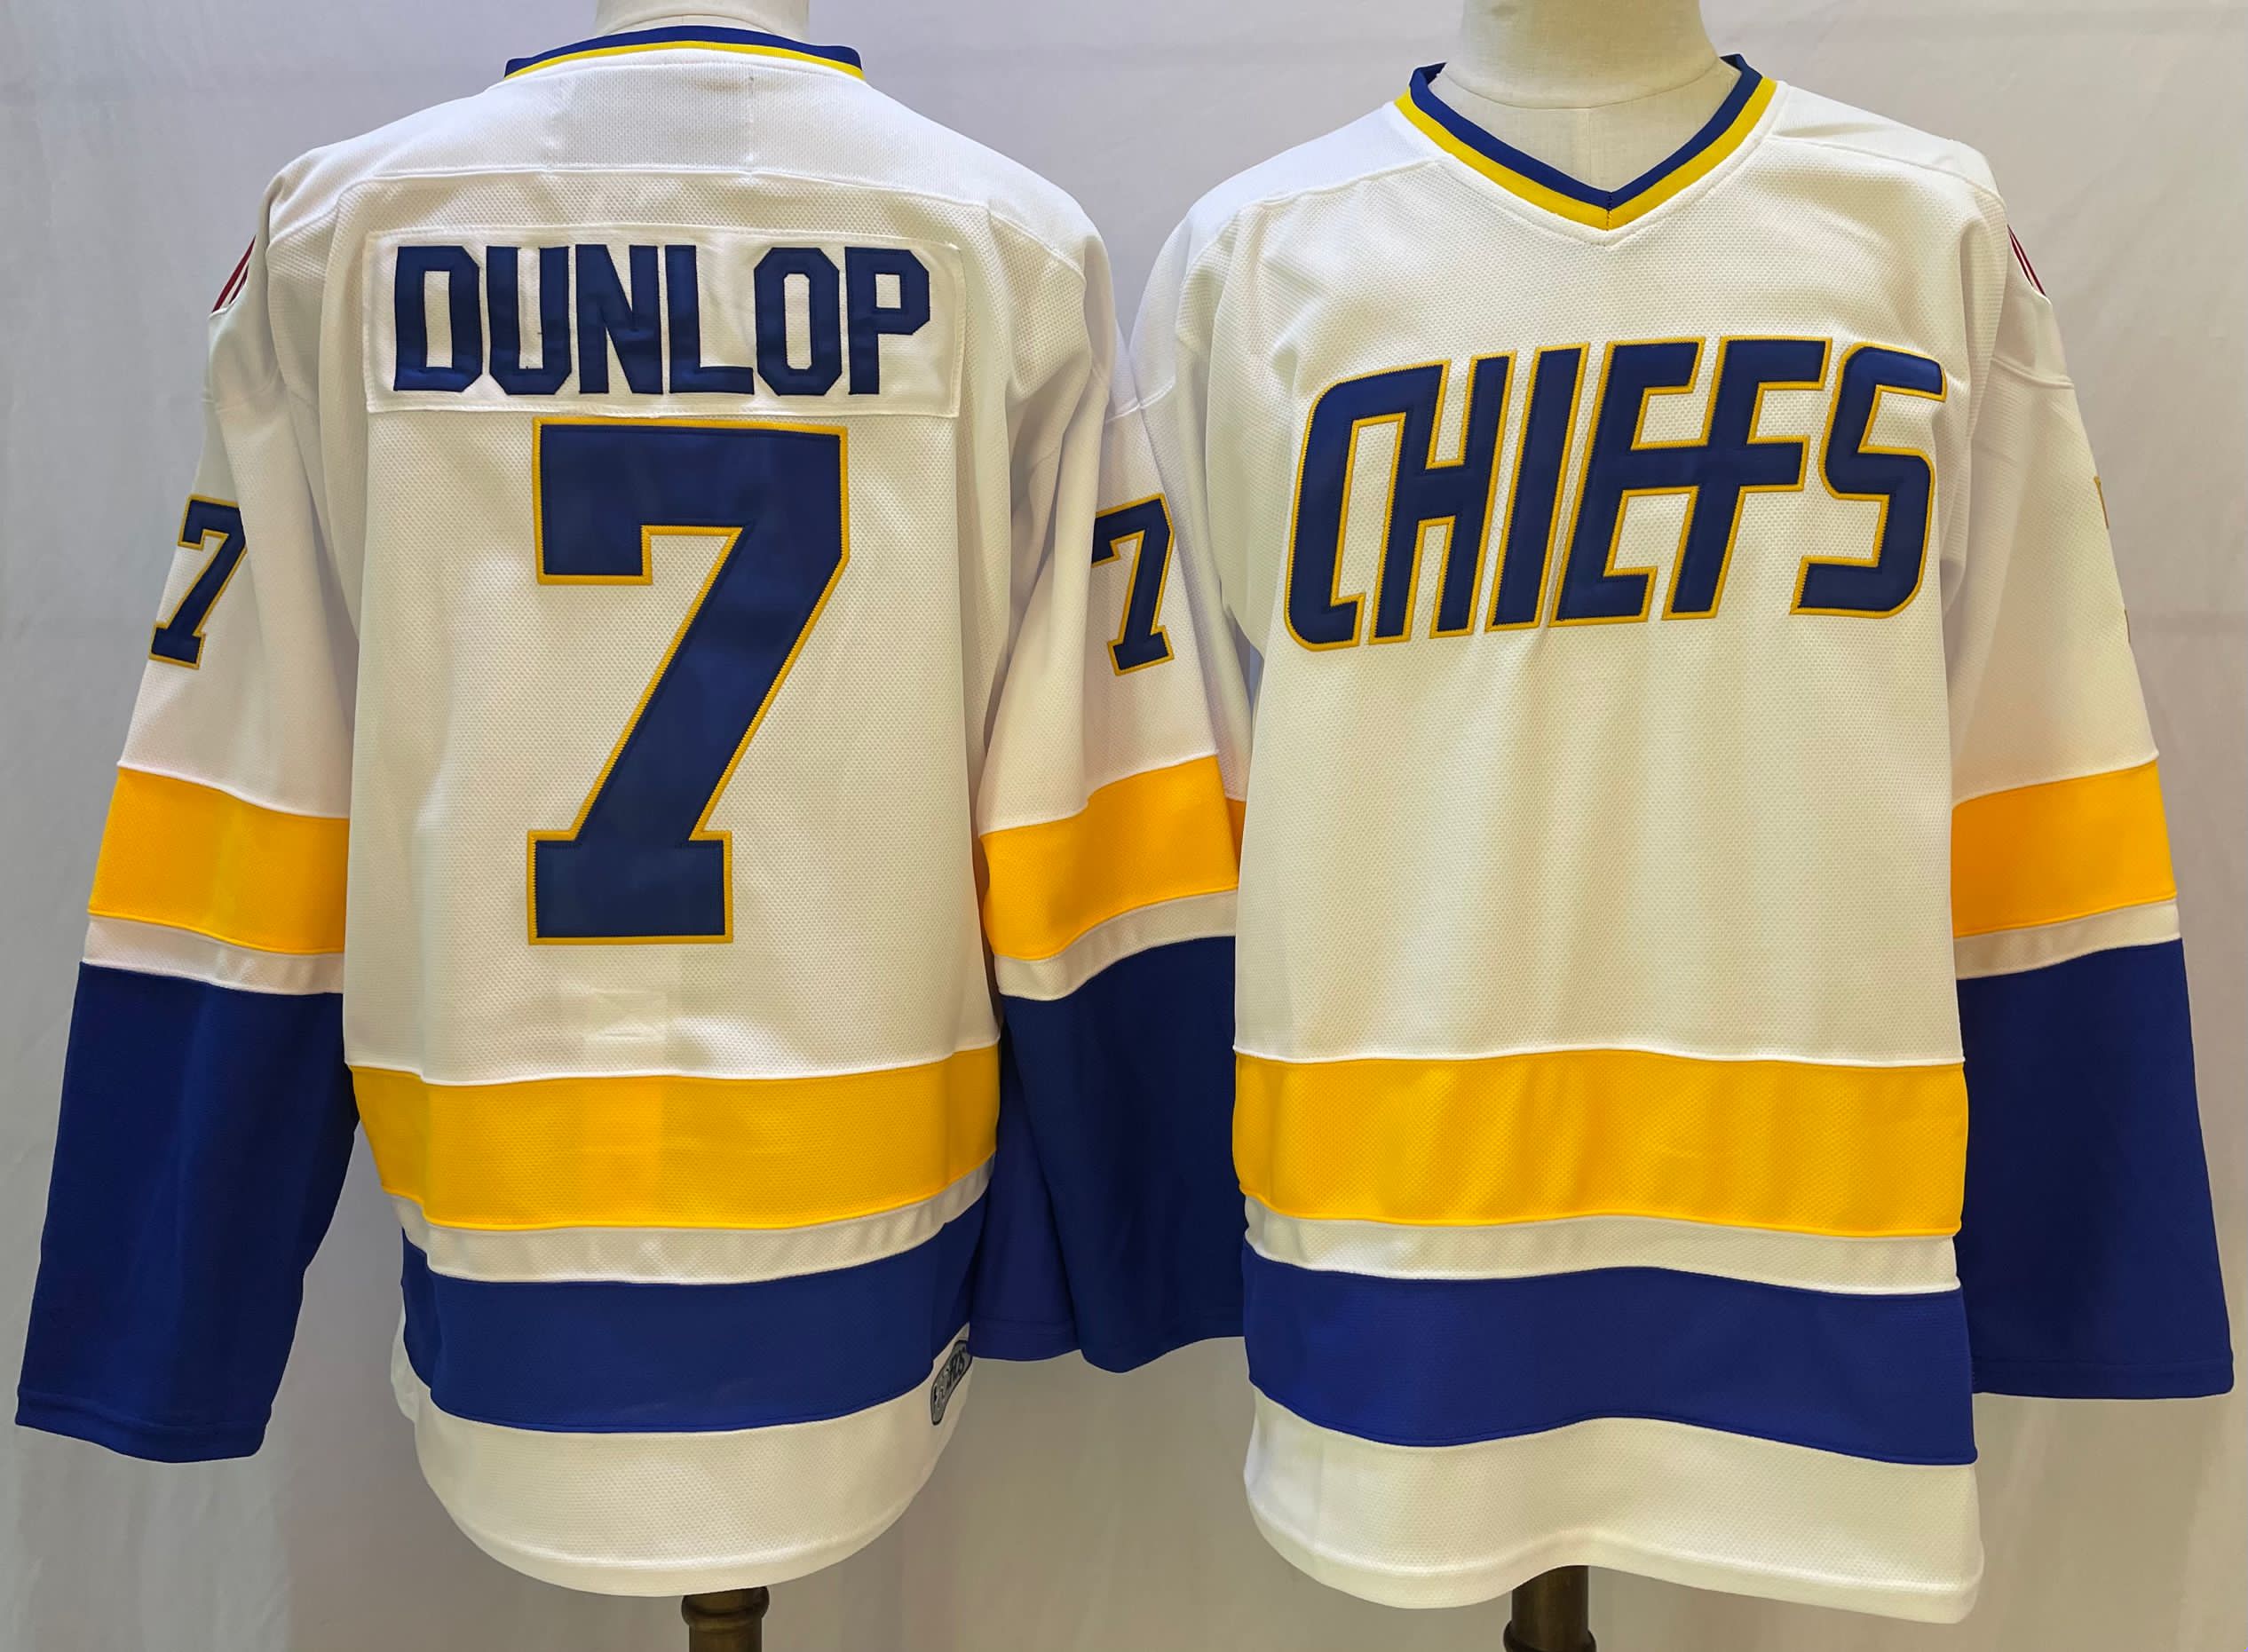 The NHL Movie Edtion #7 DUNLOP White Jersey